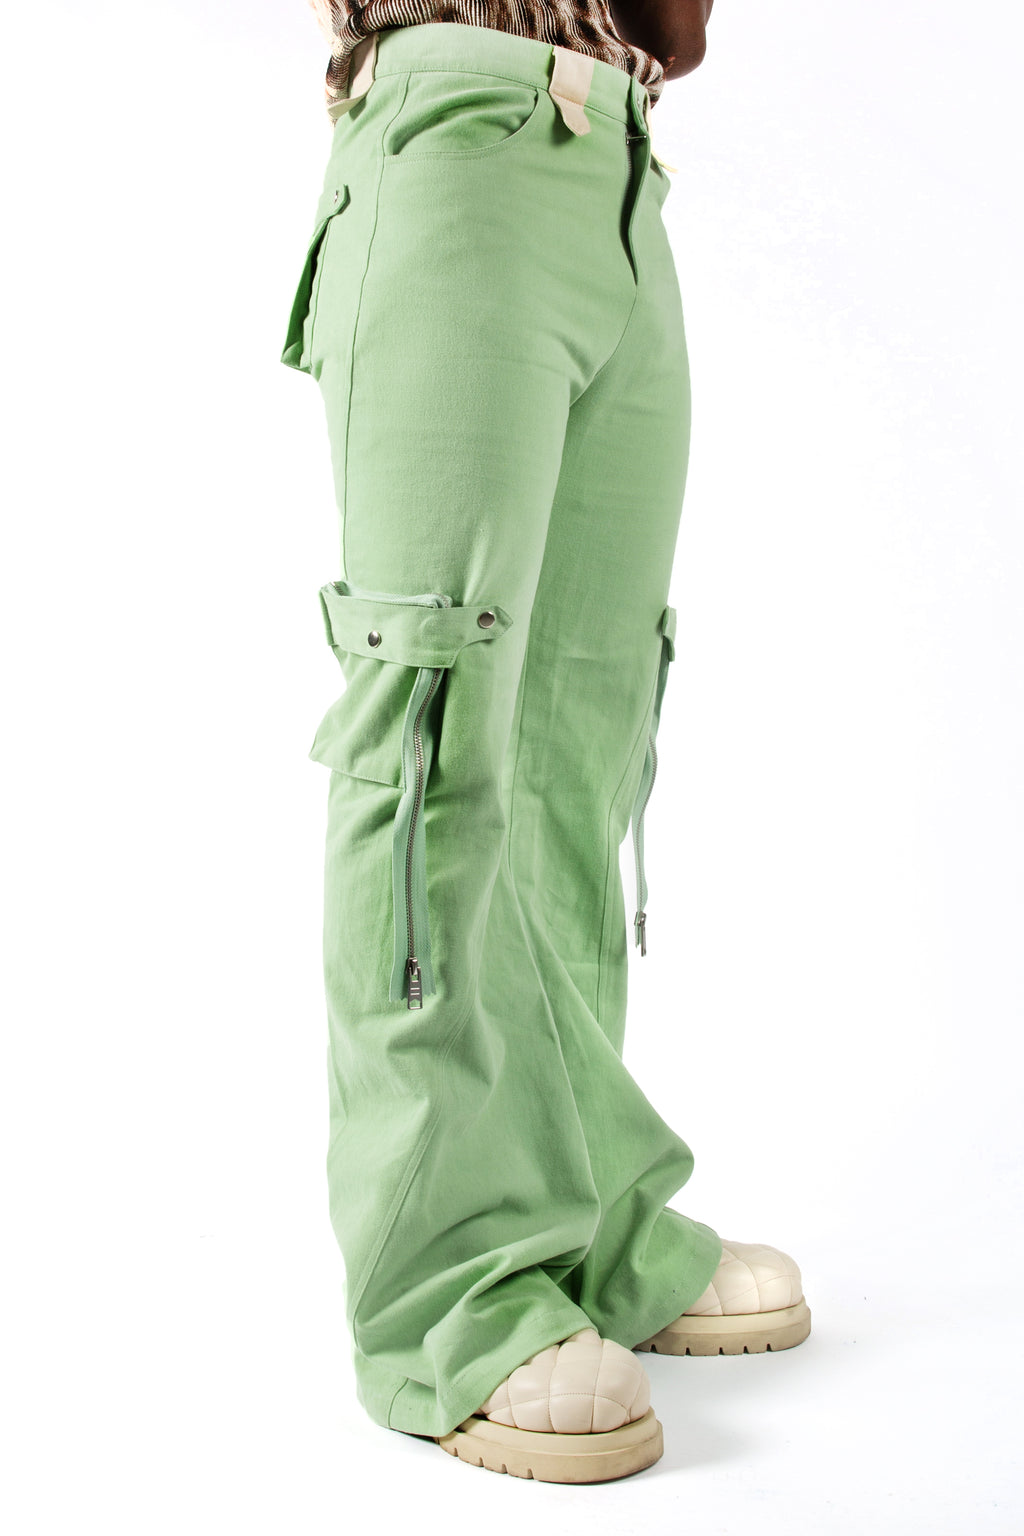 Geppetto worker pants